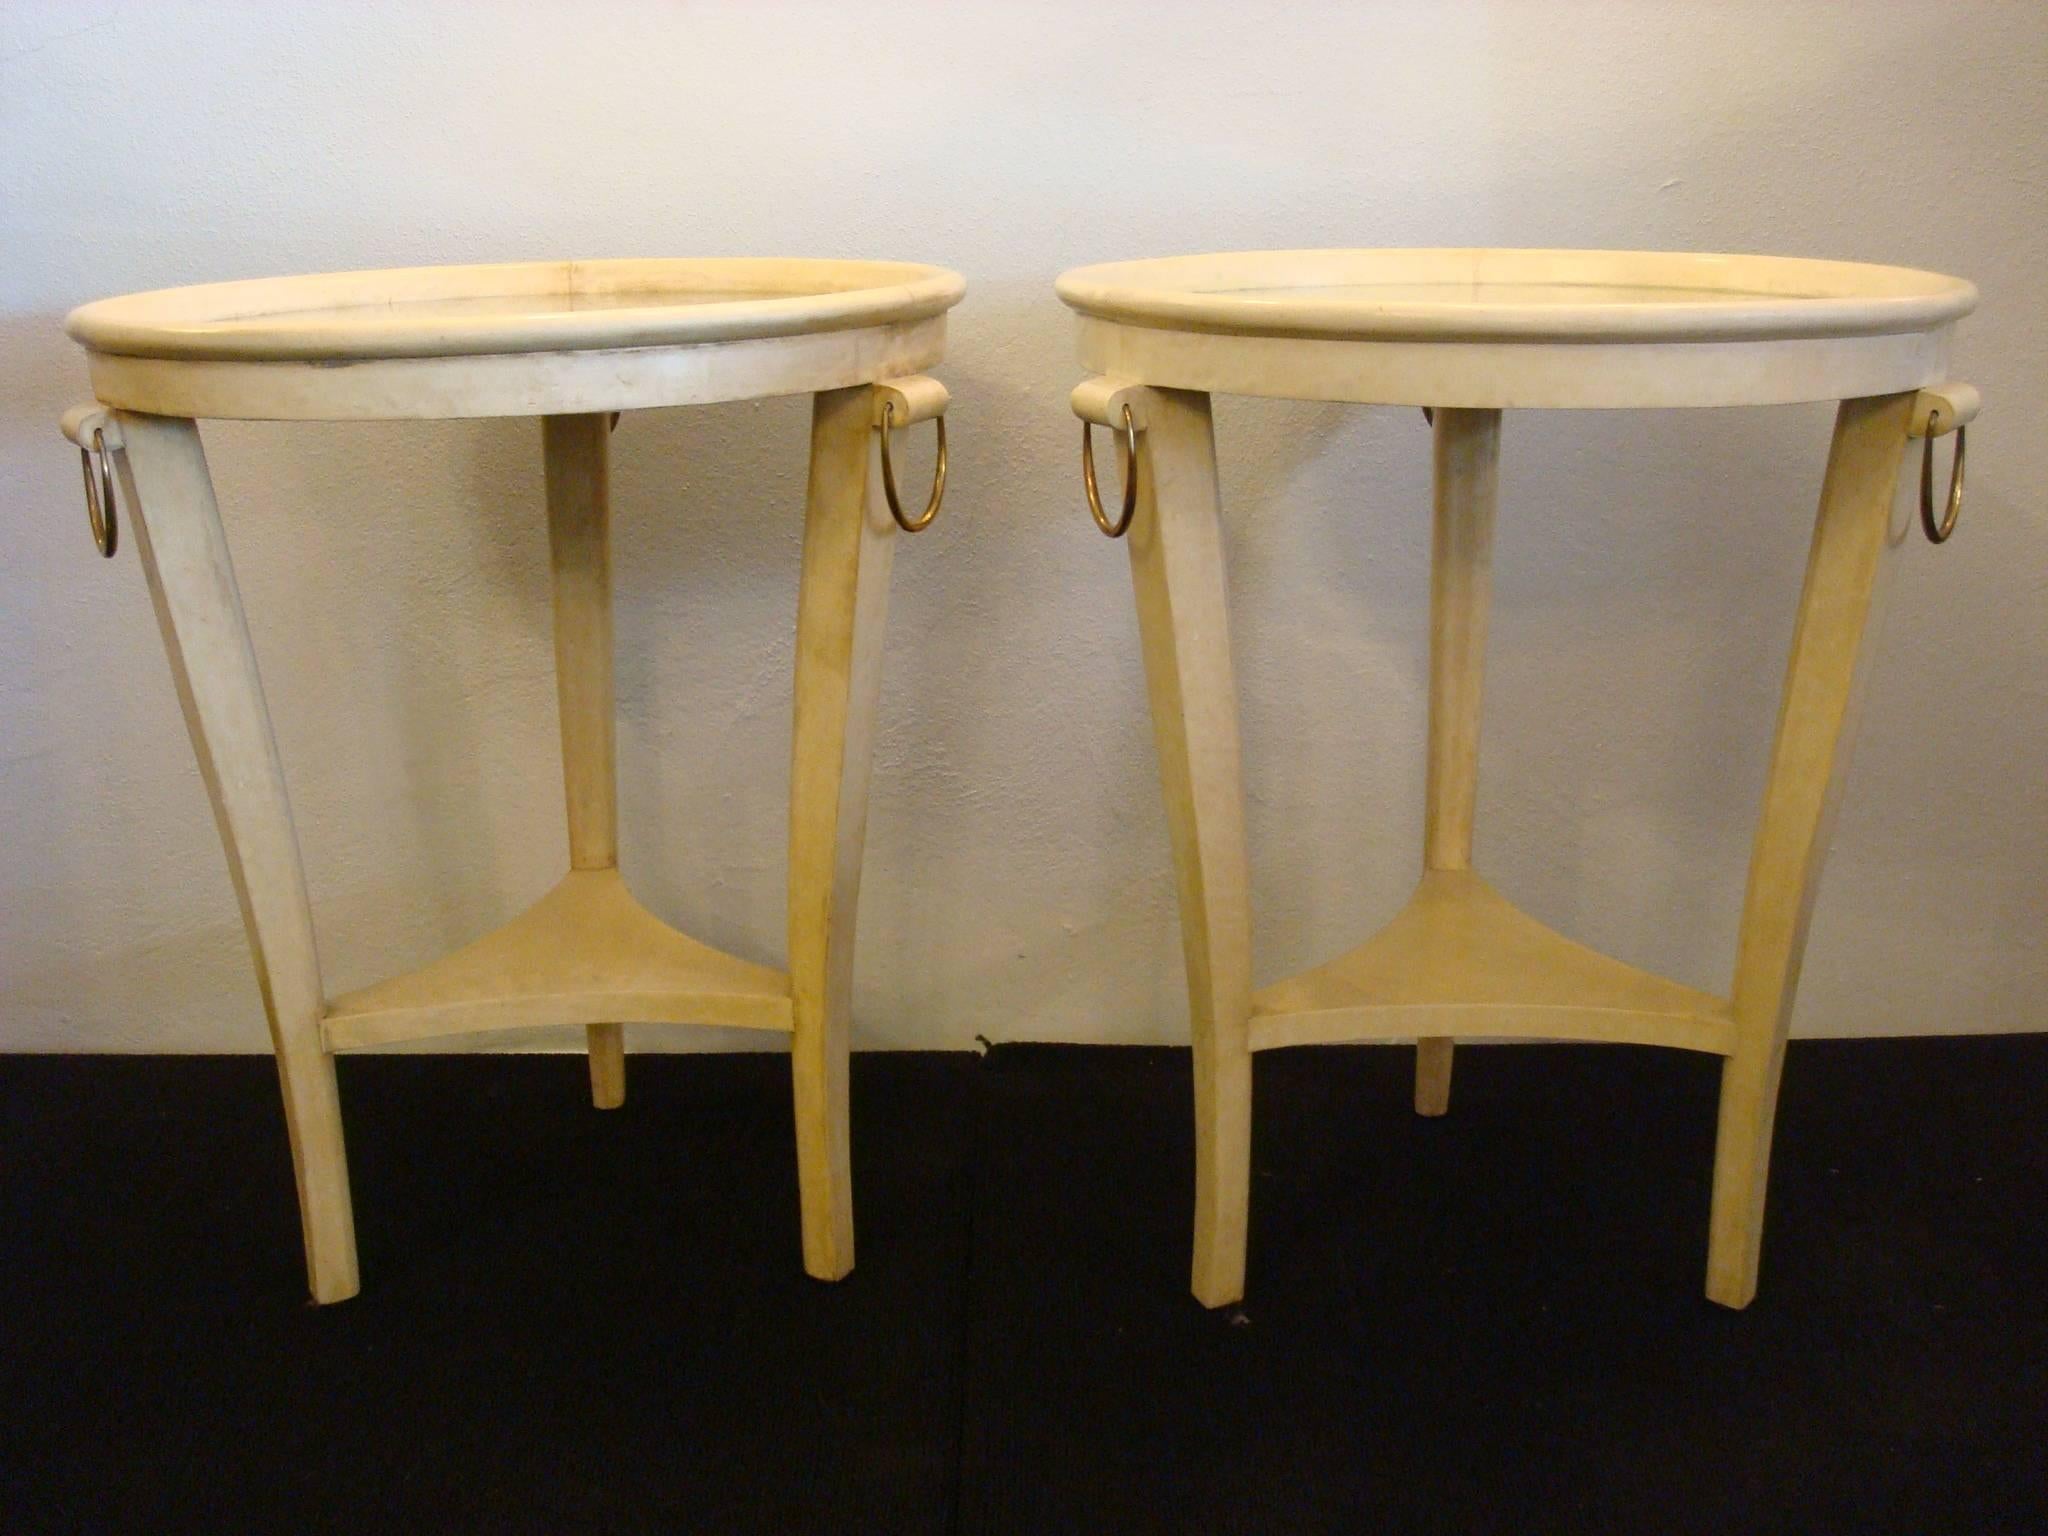 Lovely pair of sofa side tables. Wood covered with parchment leather. Original mirror on the top. Made in France, 1930s.